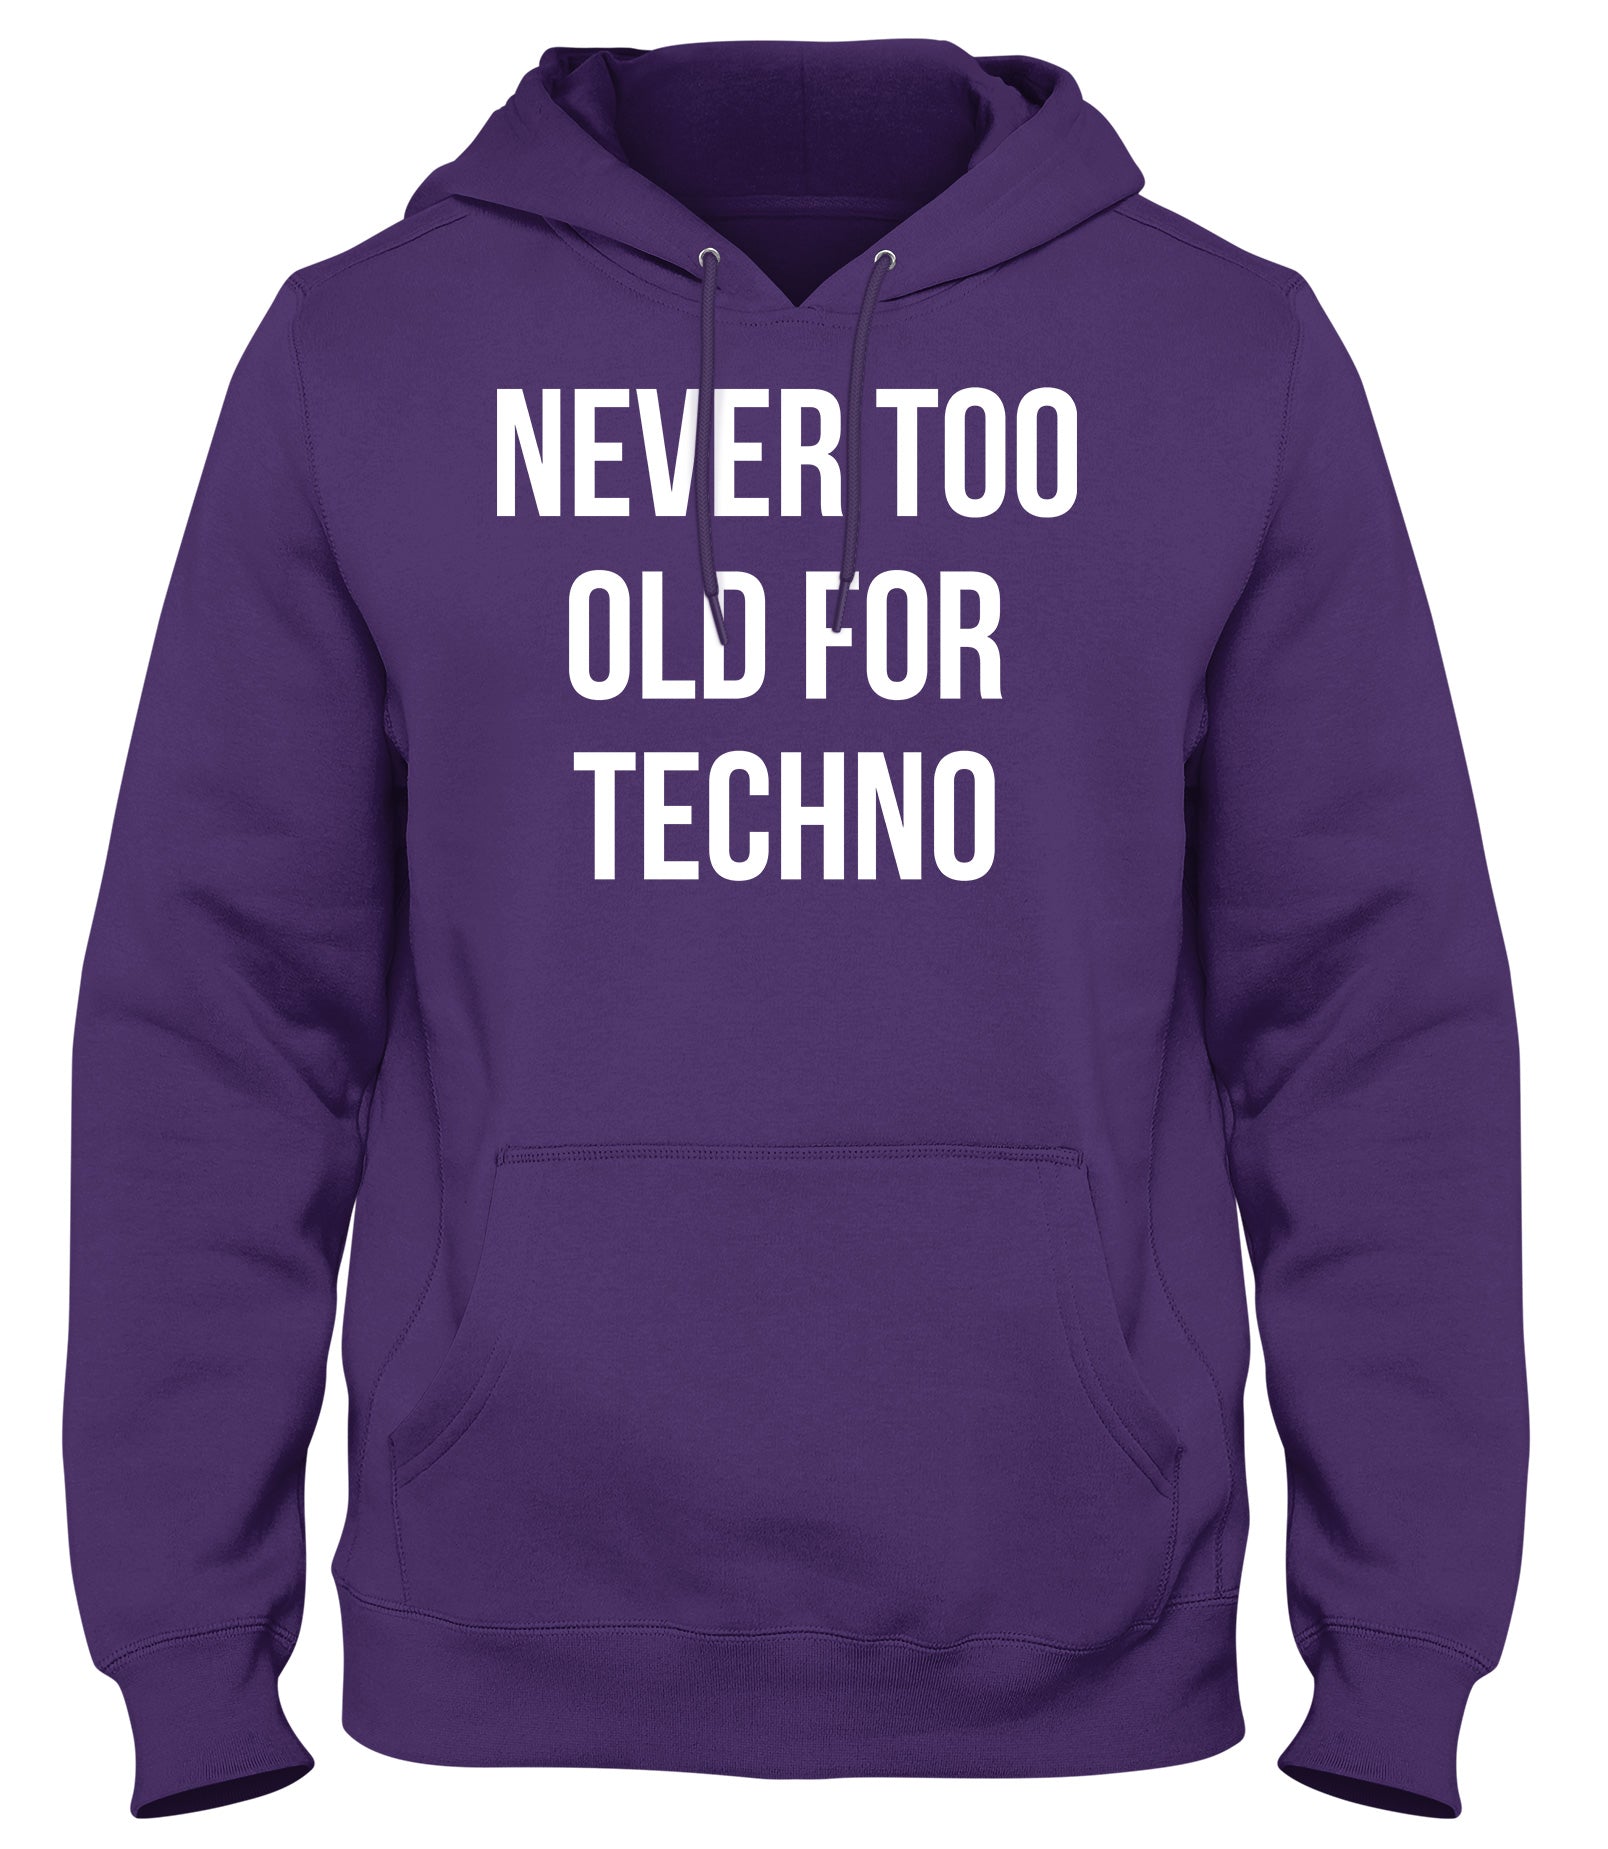 NEVER TOO OLD FOR TECHNO MENS WOMENS UNISEX FUNNY HOODIE